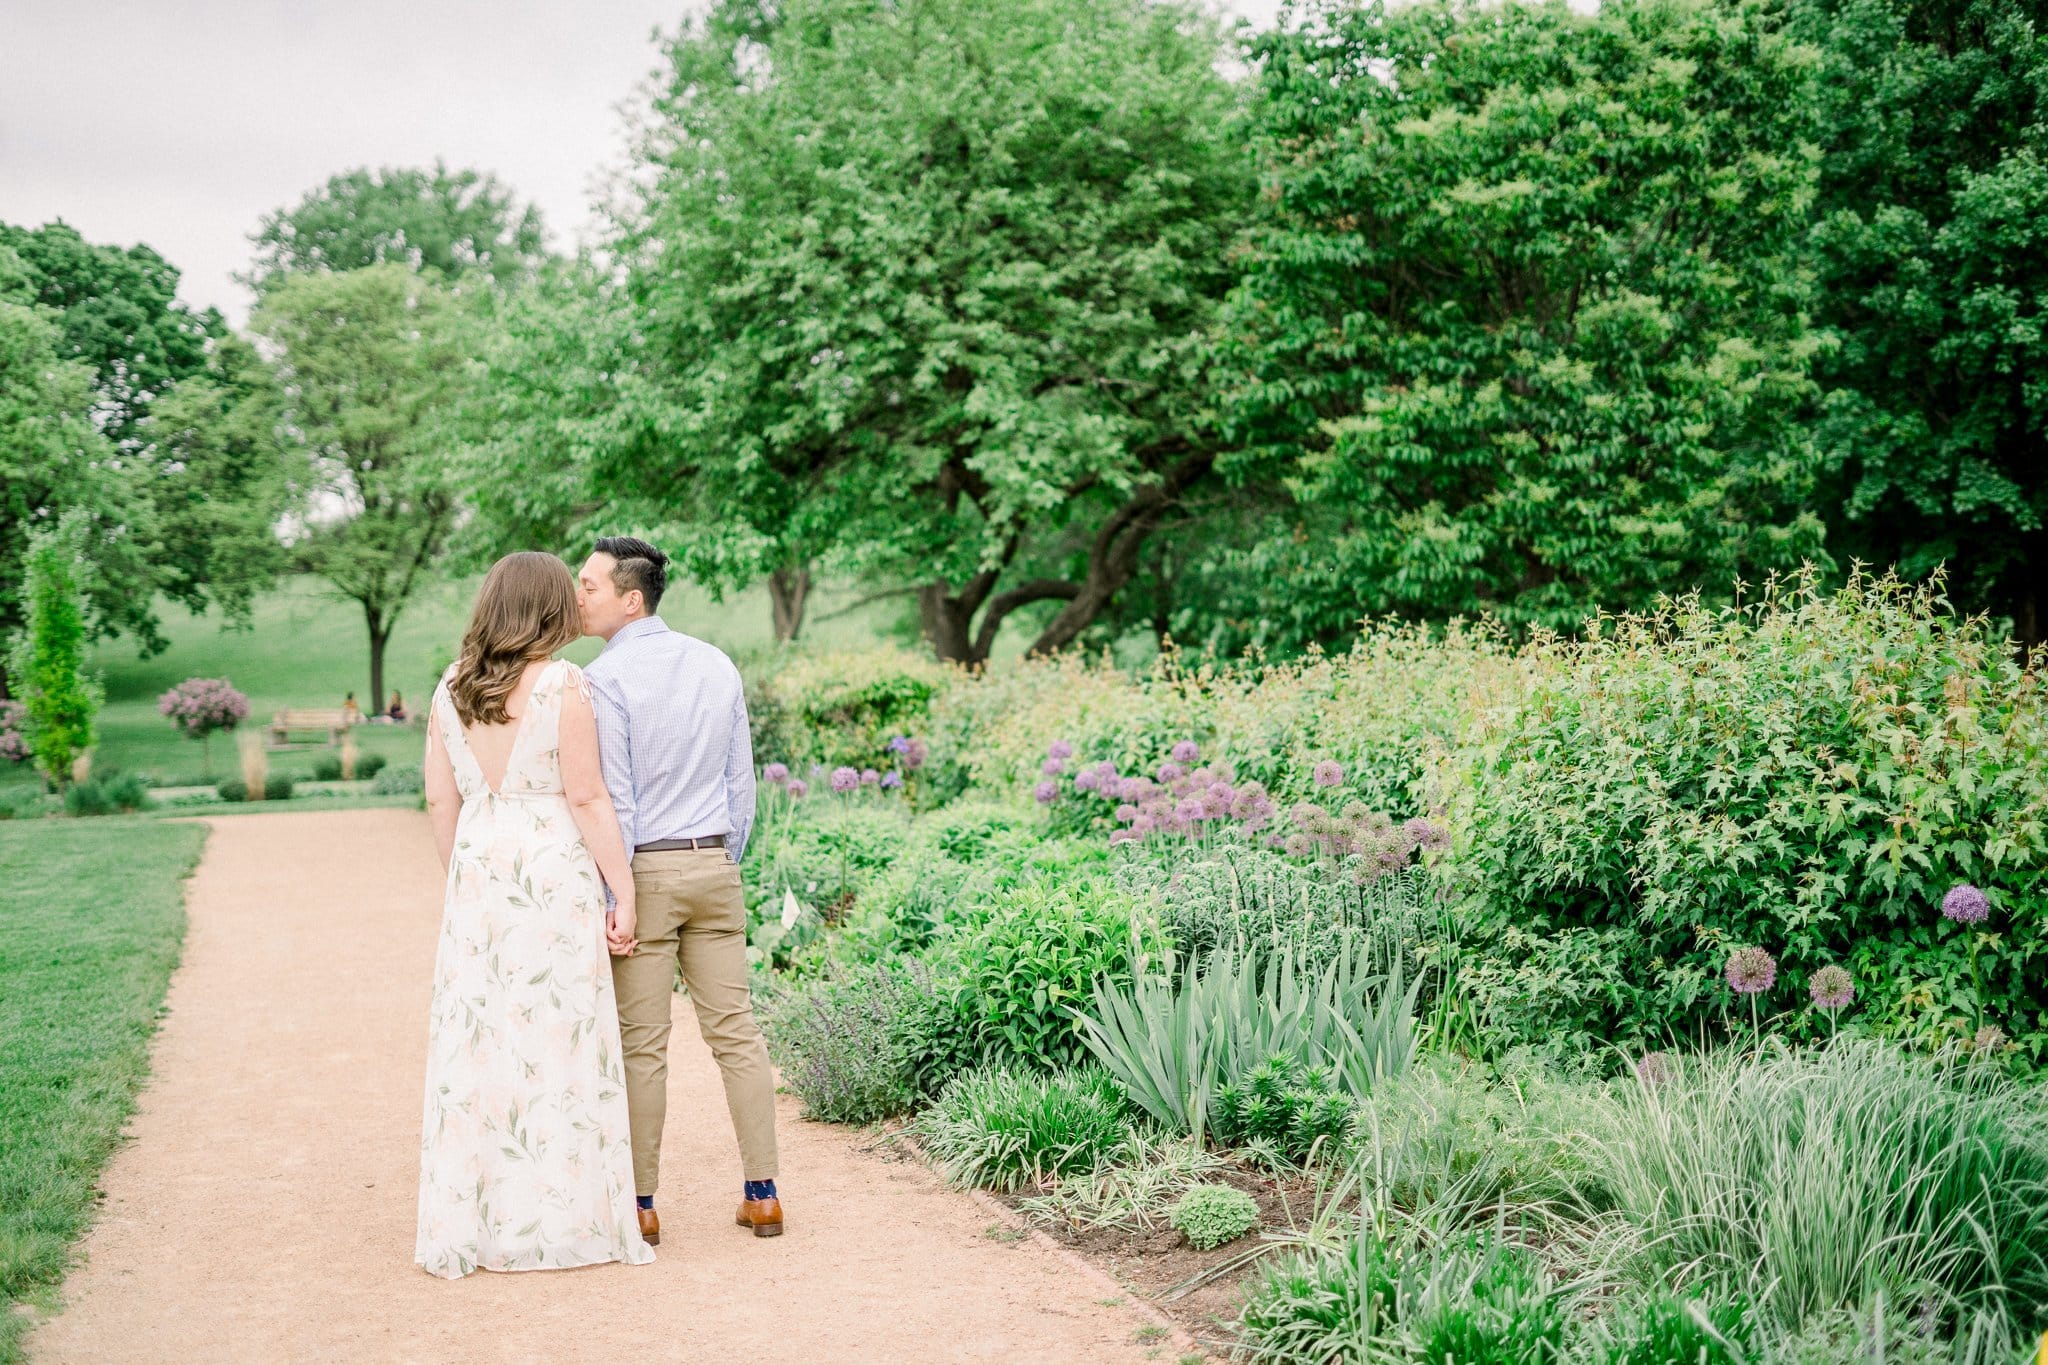 6 Tips for Adding Adventure to Your Engagement Session